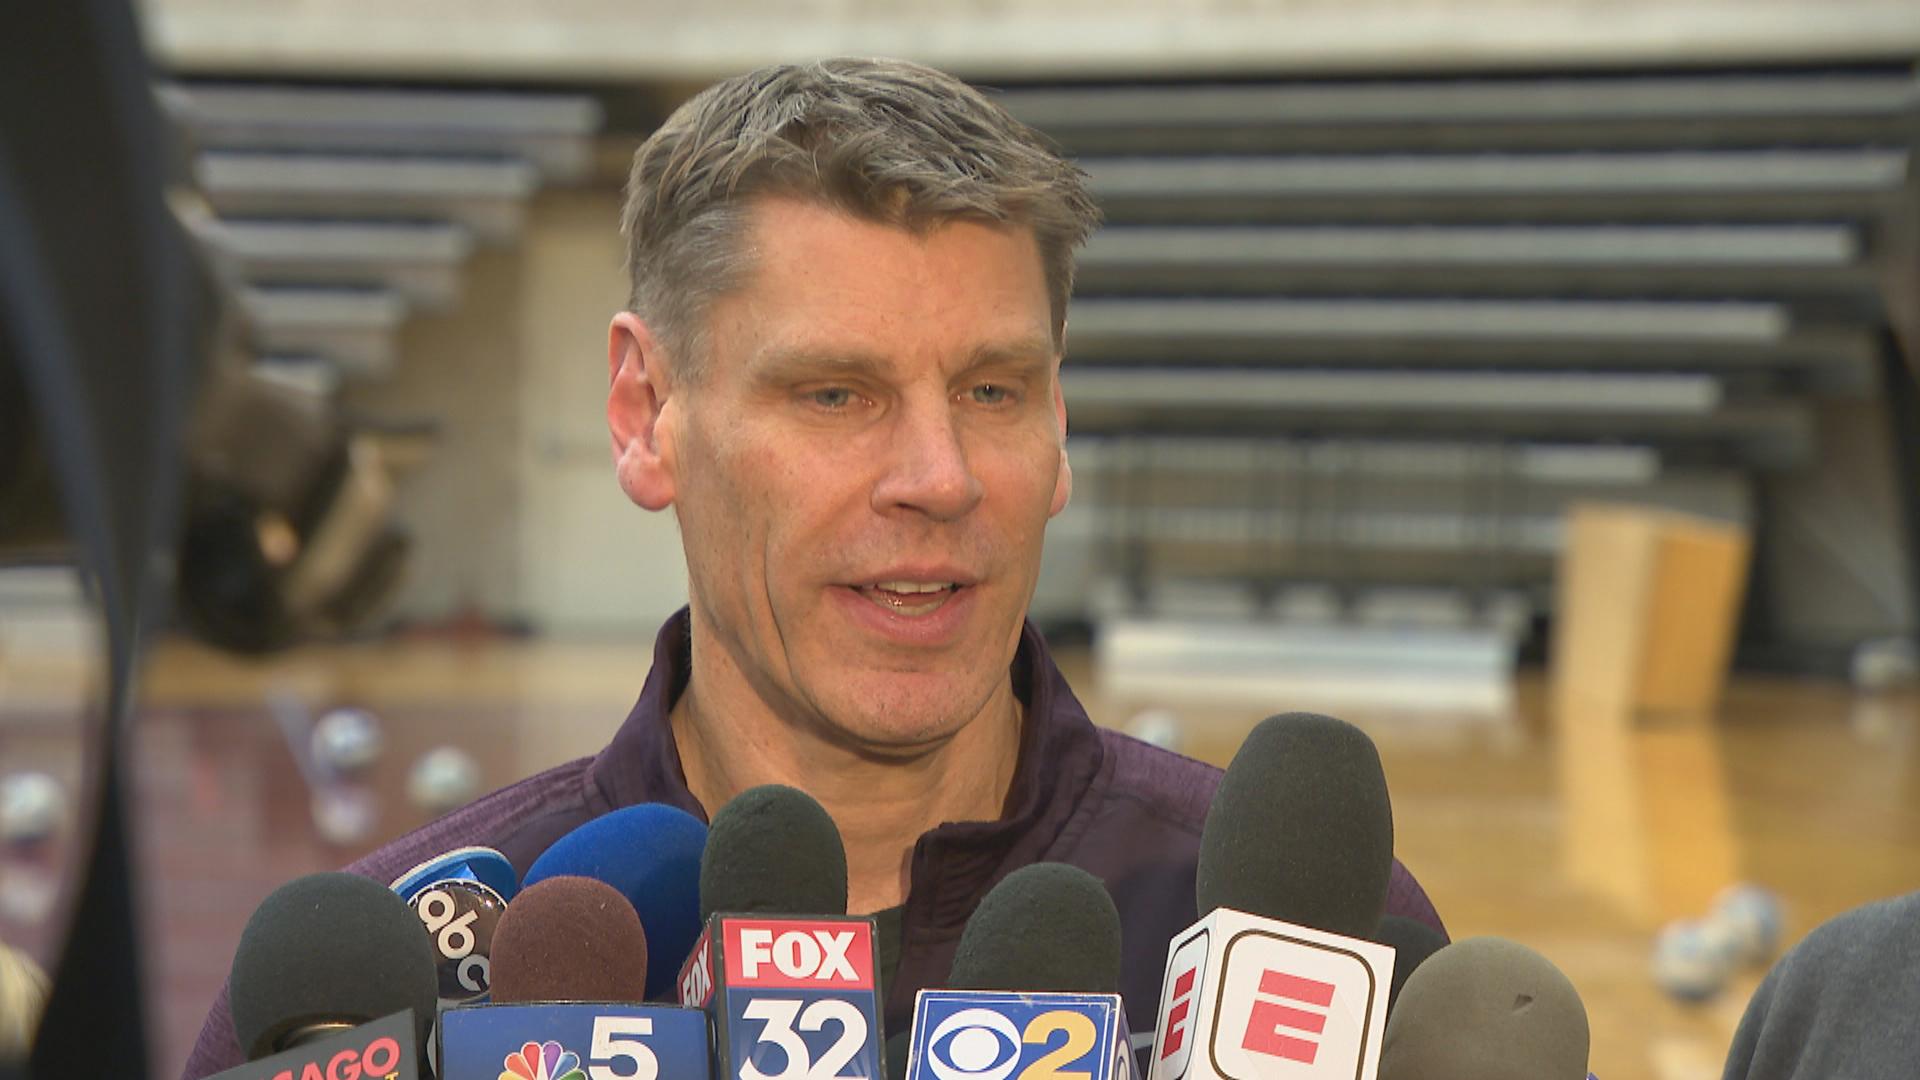 Loyola University Chicago men’s basketball coach Porter Moser speaks to the press March 19, 2018. (Chicago Tonight)